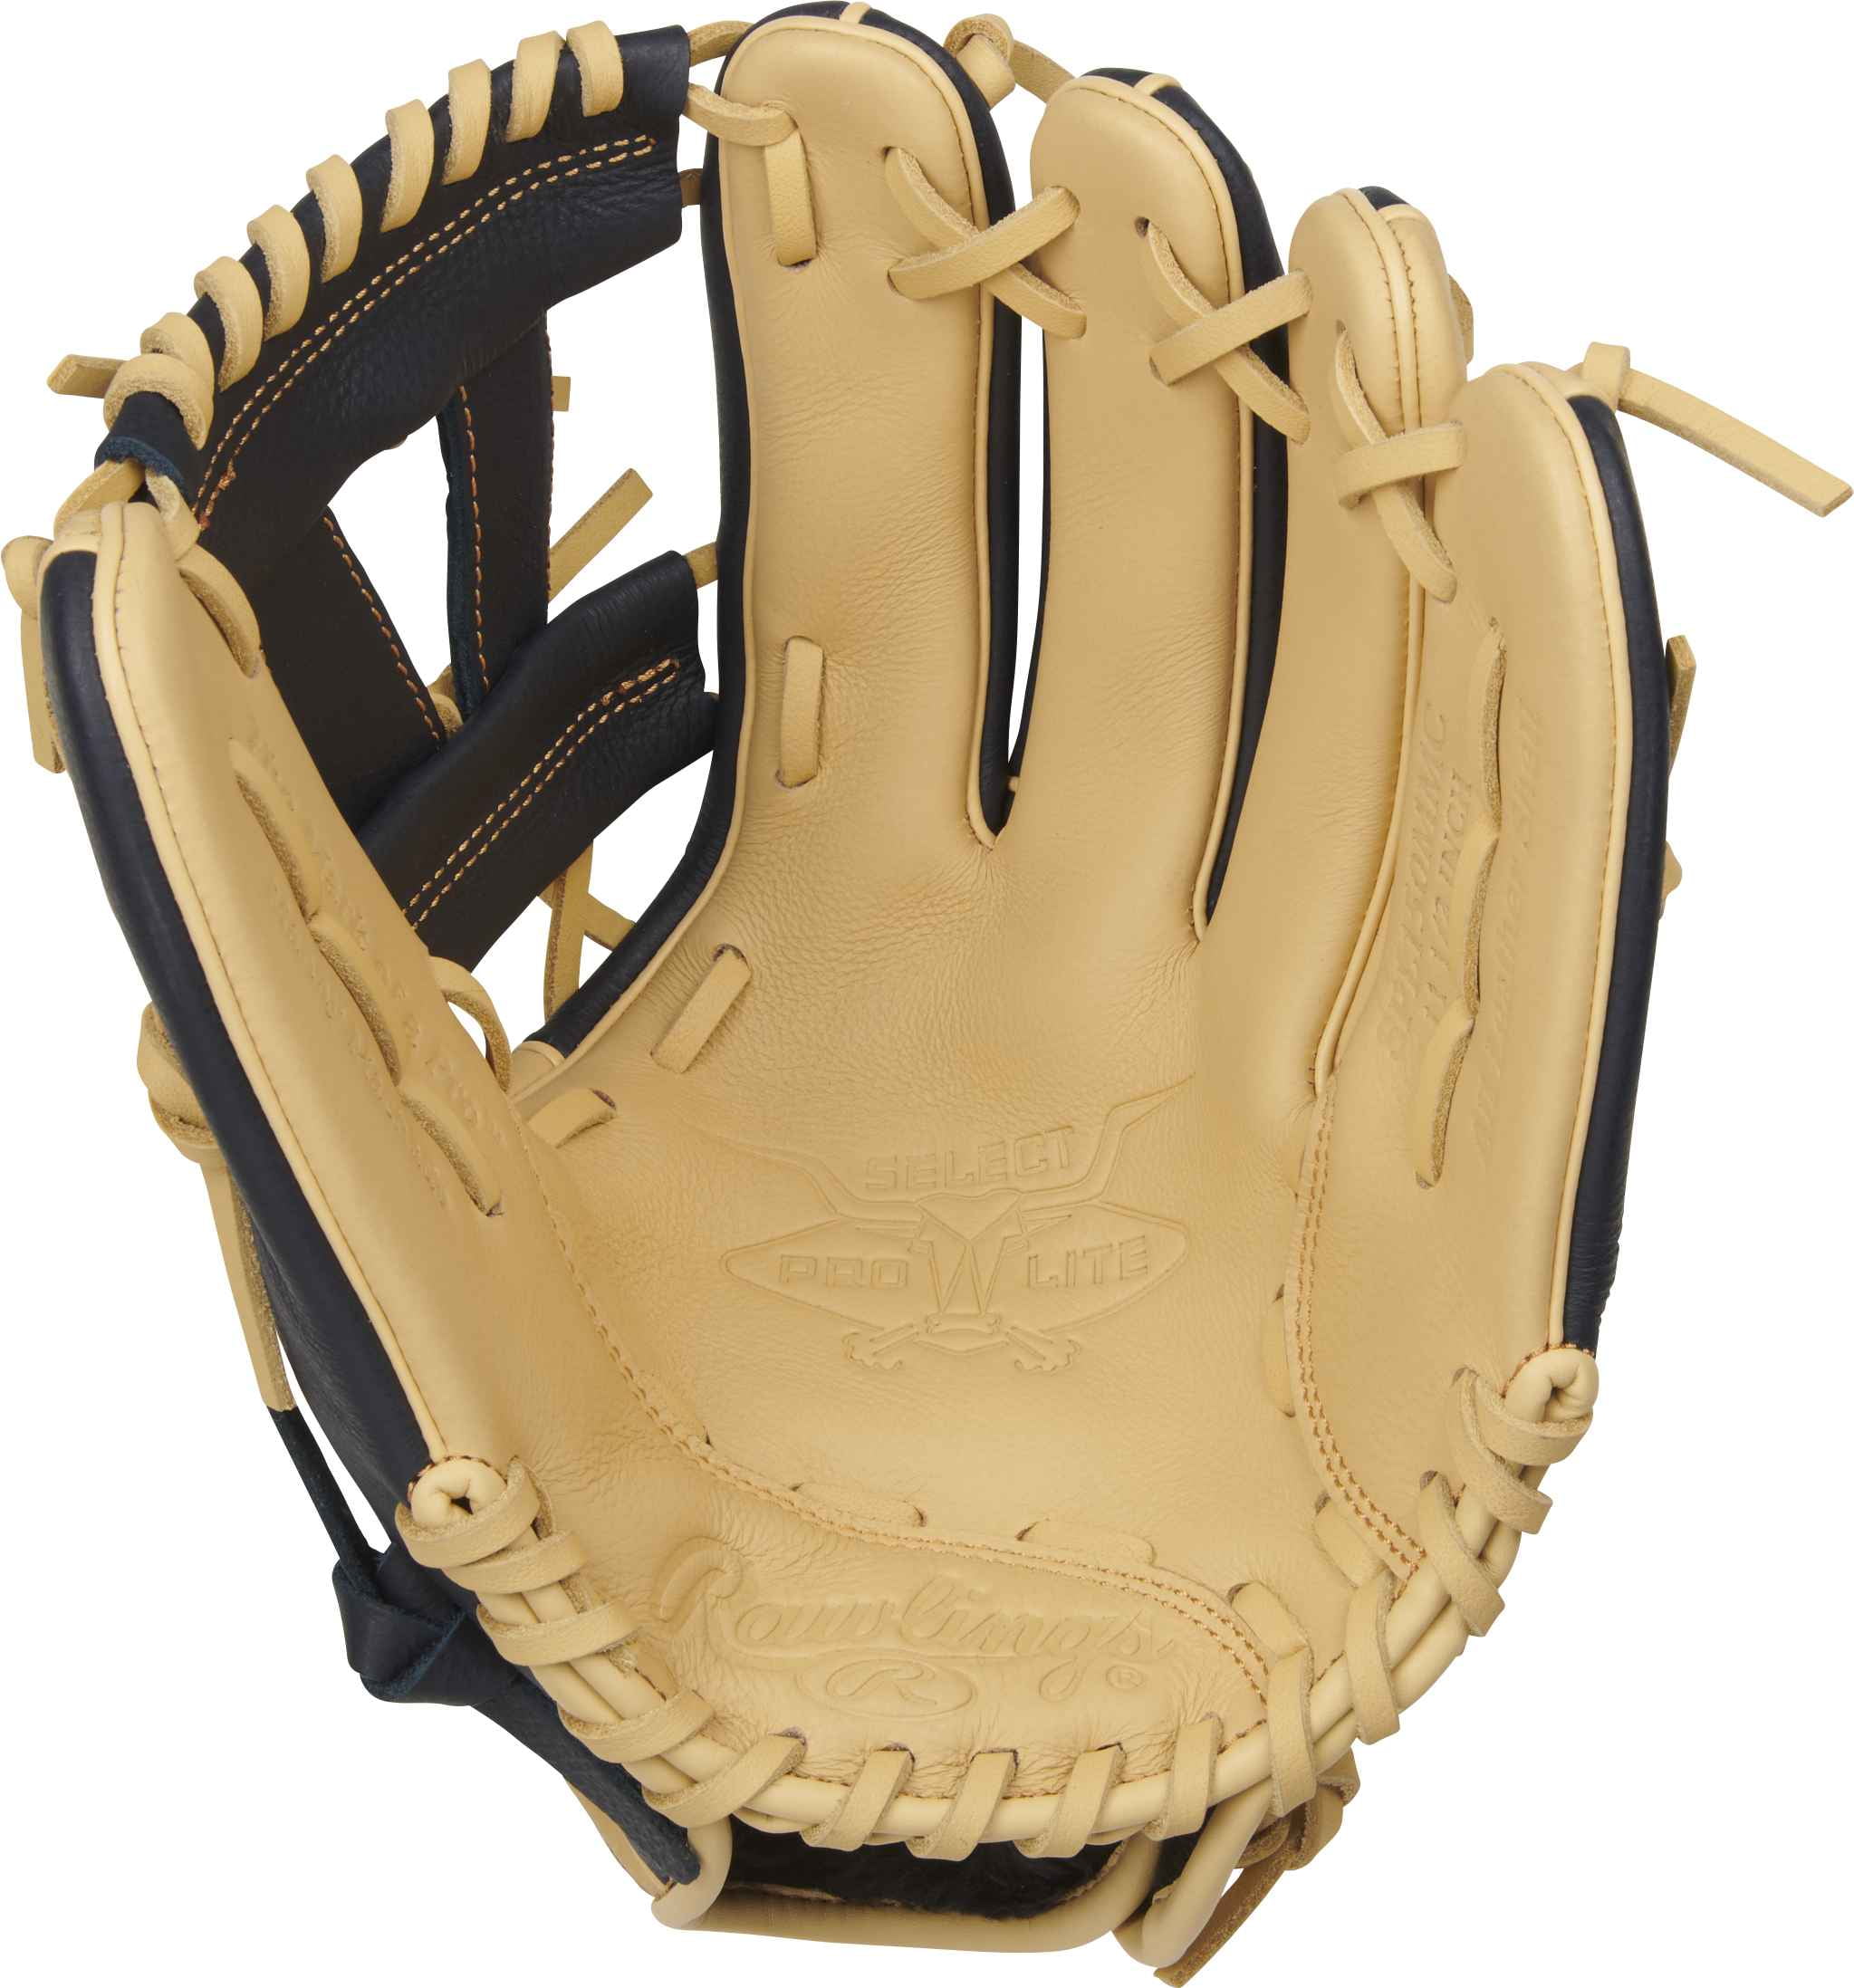 Rawlings Select Pro Lite 11.5-inch Glove - Manny Machado, Right Hand Throw